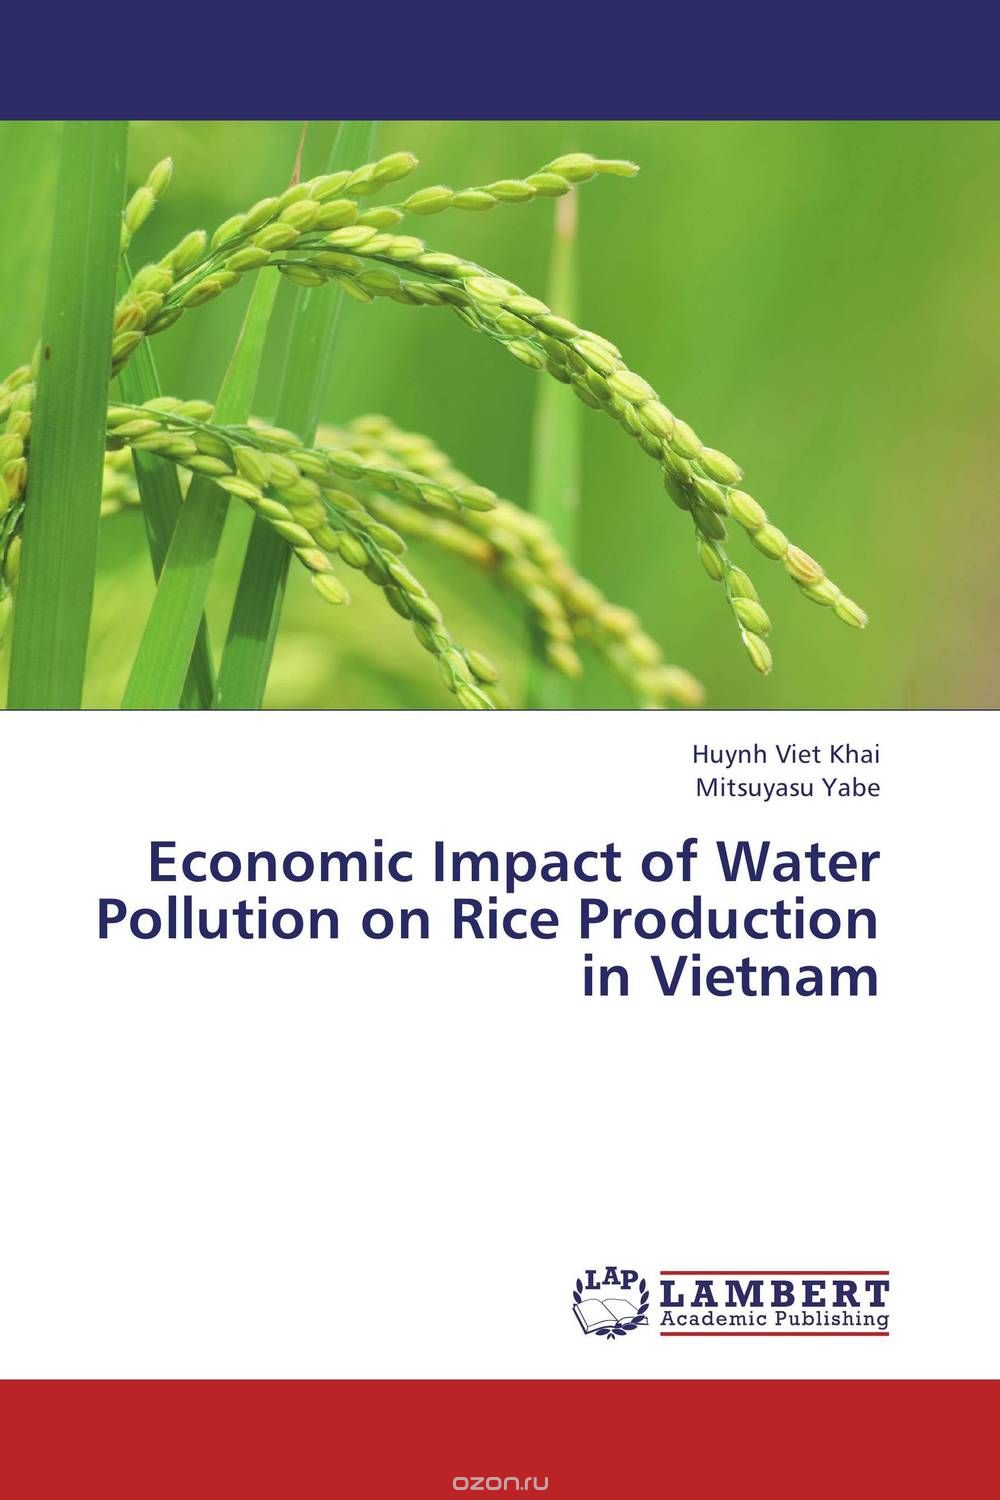 Economic Impact of Water Pollution on Rice Production in Vietnam